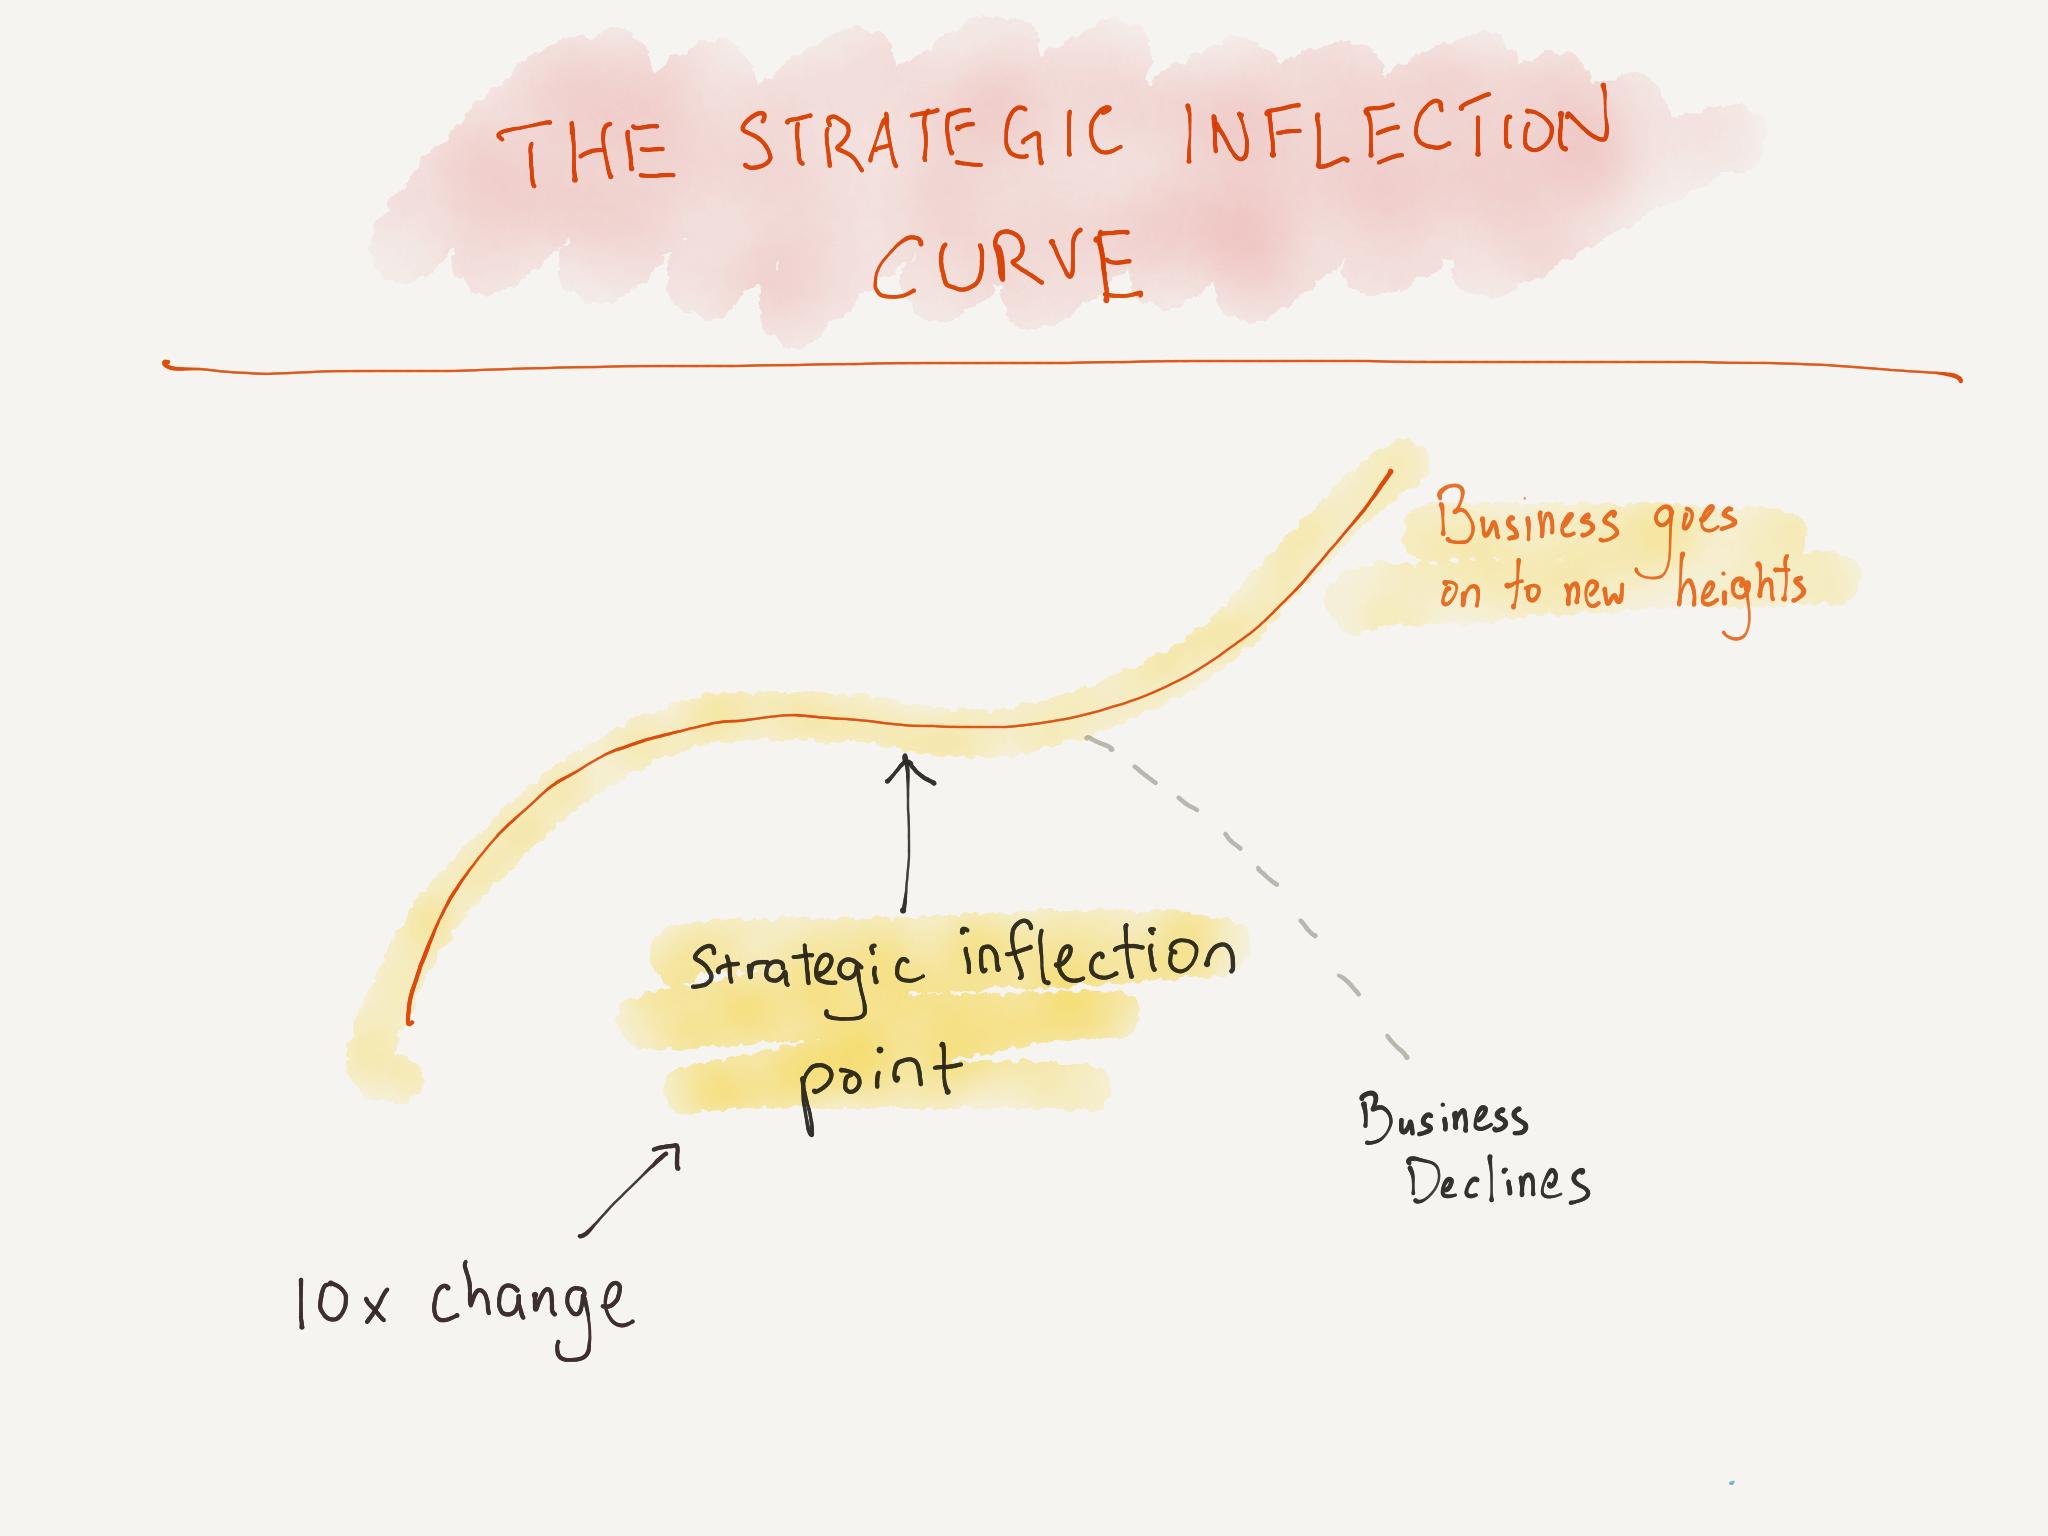 Diagram of the strategic inflection curve